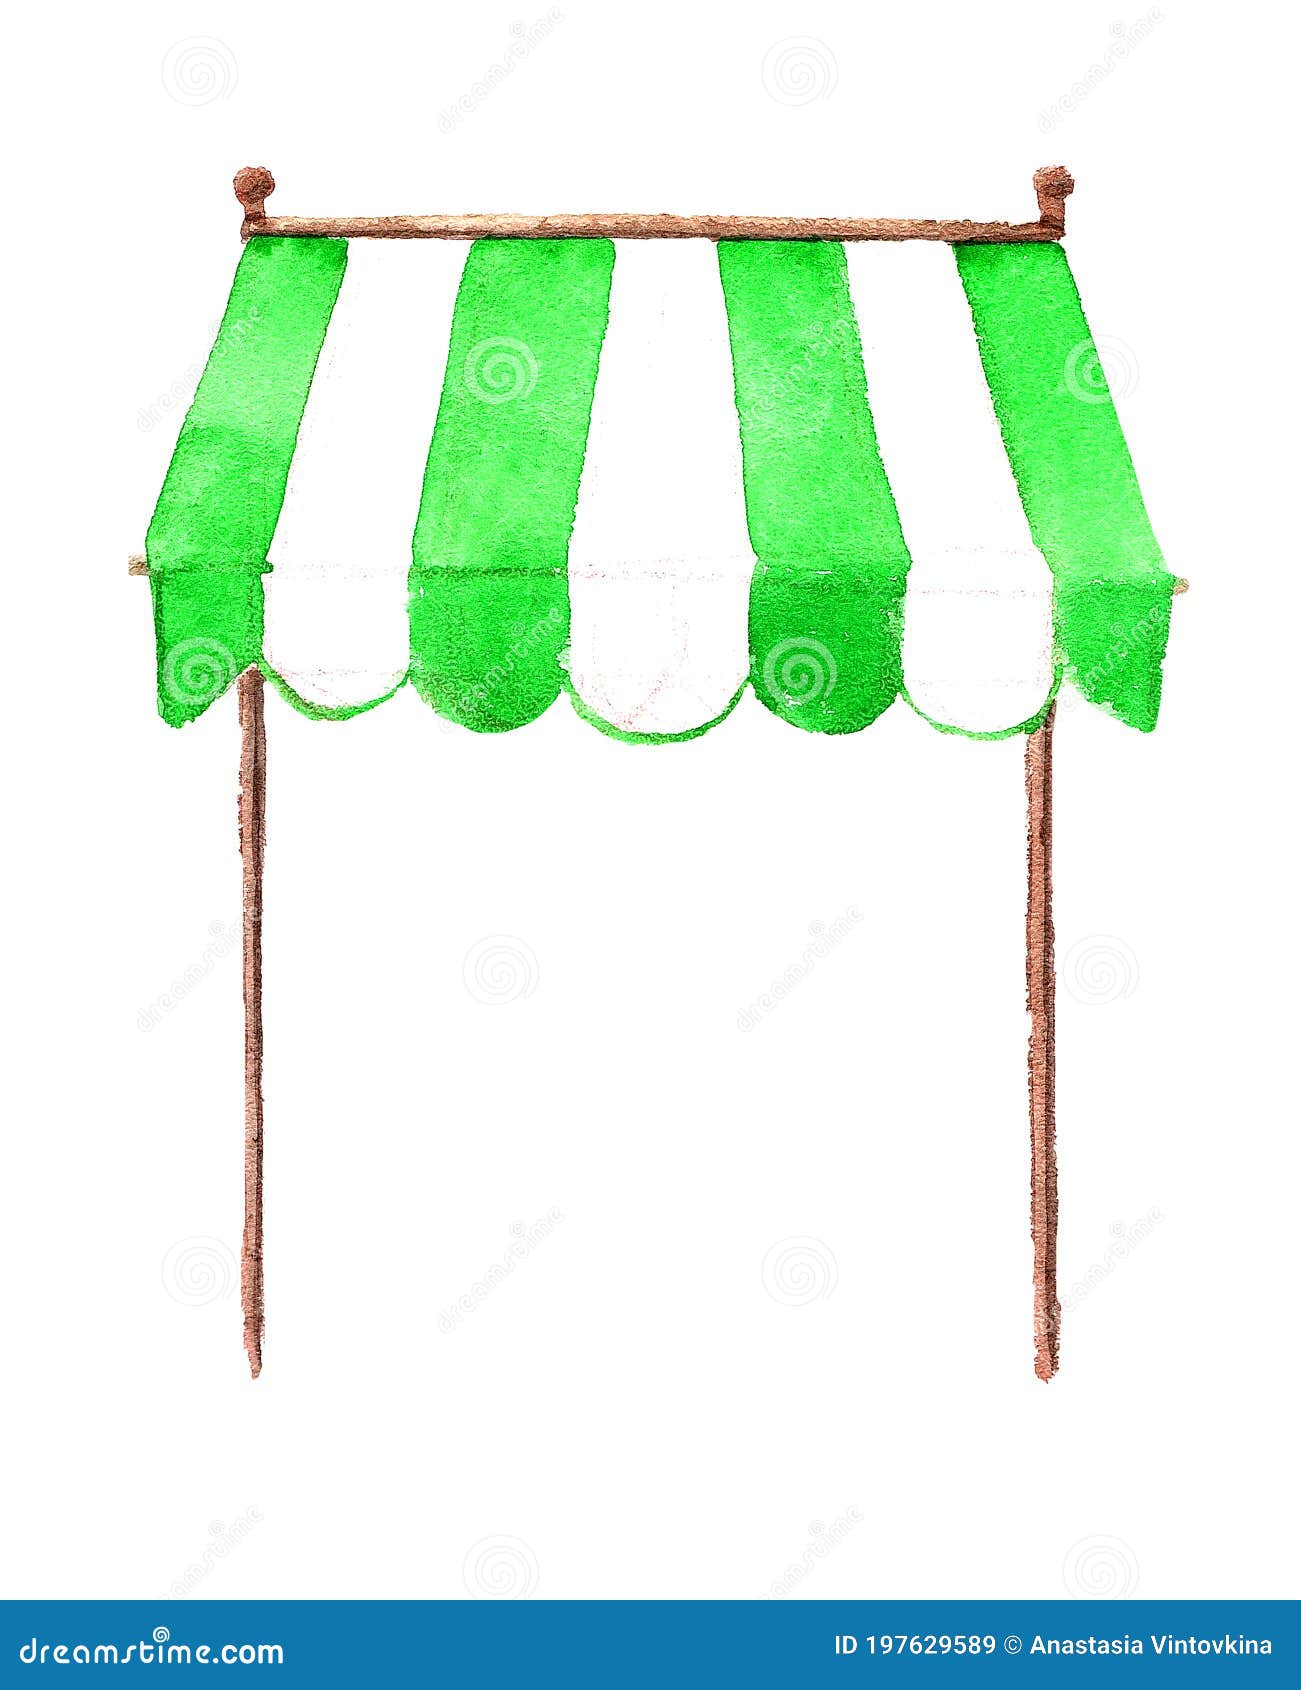 green and white striped awning for a store, cafe, street restaurant, market. one single object, front view. a hand-drawn